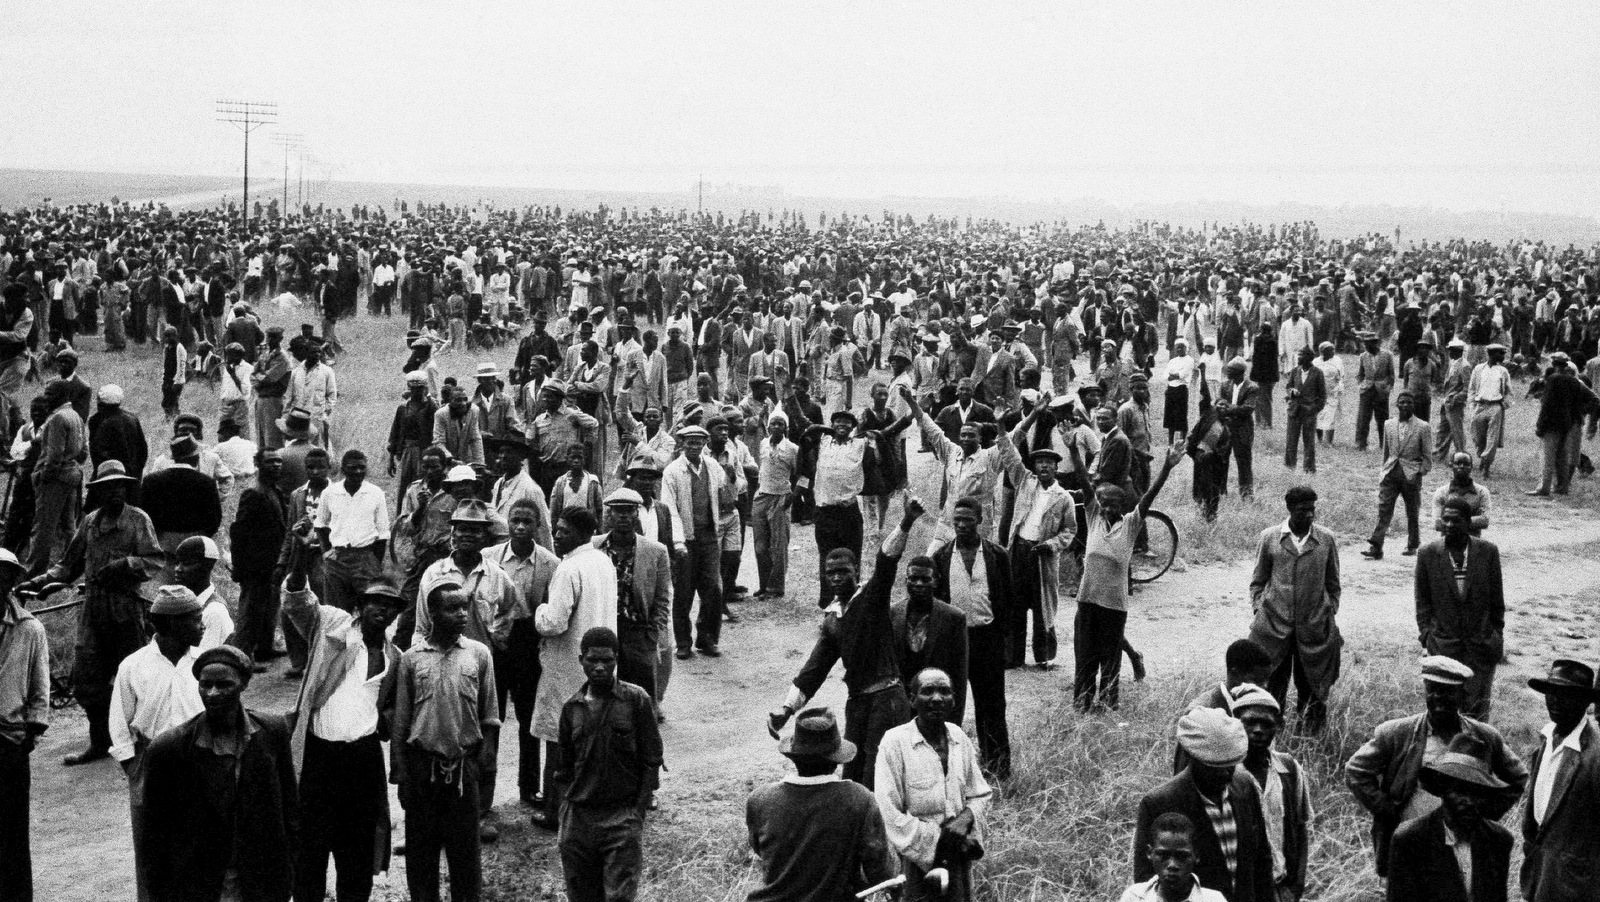 A crowd gathers at the township of Sharpeville, south of Johannesburg, South Africa, March 21, 1960, a few hours before white police opened fire on them with bren-guns. They were demonstrating against the law requiring Africans to carry passes. Sixty Africans were killed and hundreds injured in the shooting. (AP Photo/ Cape Argus)